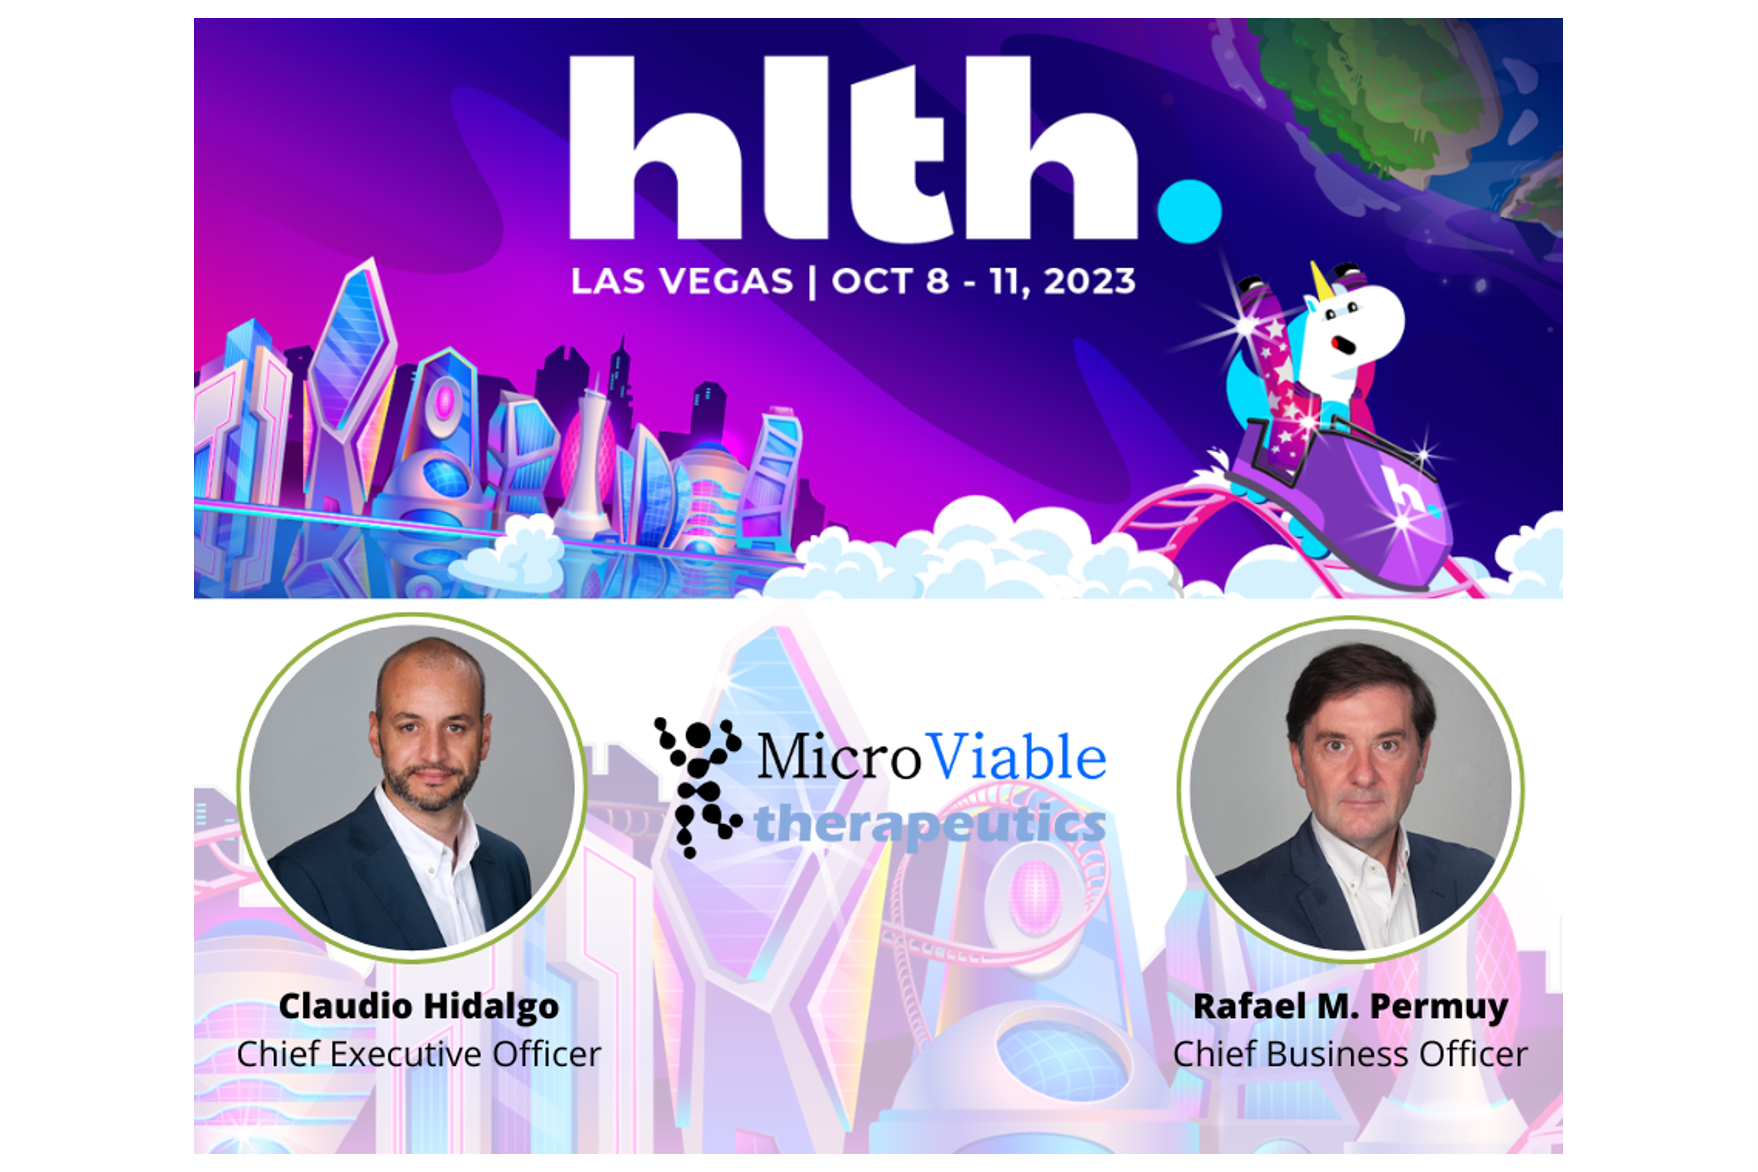 Microviable will be attending HLTH 2023. Las Vegas